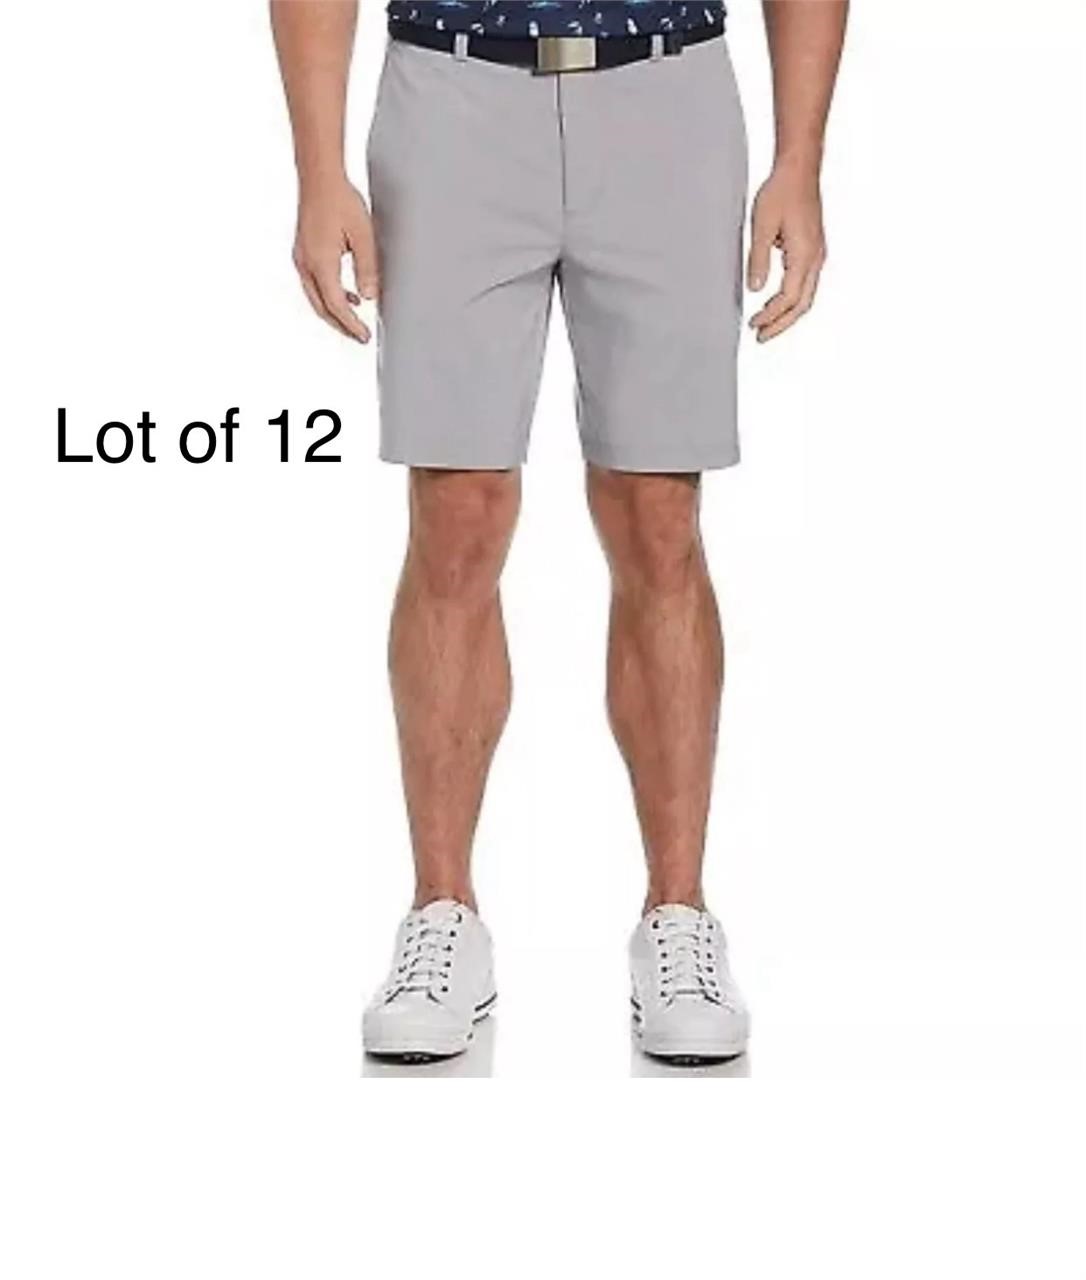 Size 30 LOT OF 12 MENS GOLF SHORTS SIZE 30 GRAY